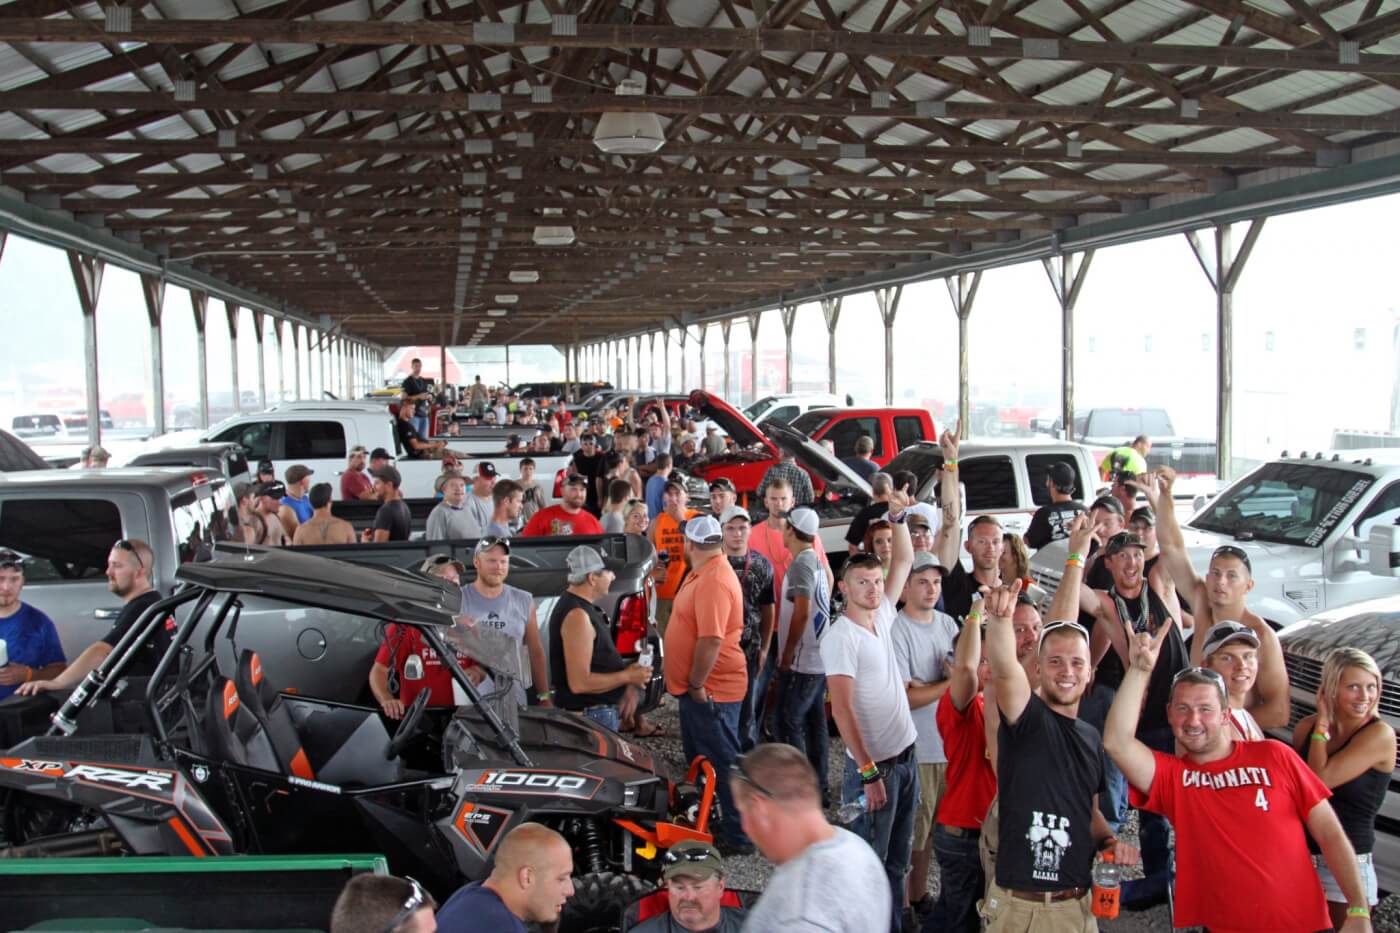 While some played in the rain, others sought refuge under the Show-N-Shine pavilion to hang out with fellow diesel enthusiasts and wait out the storm.